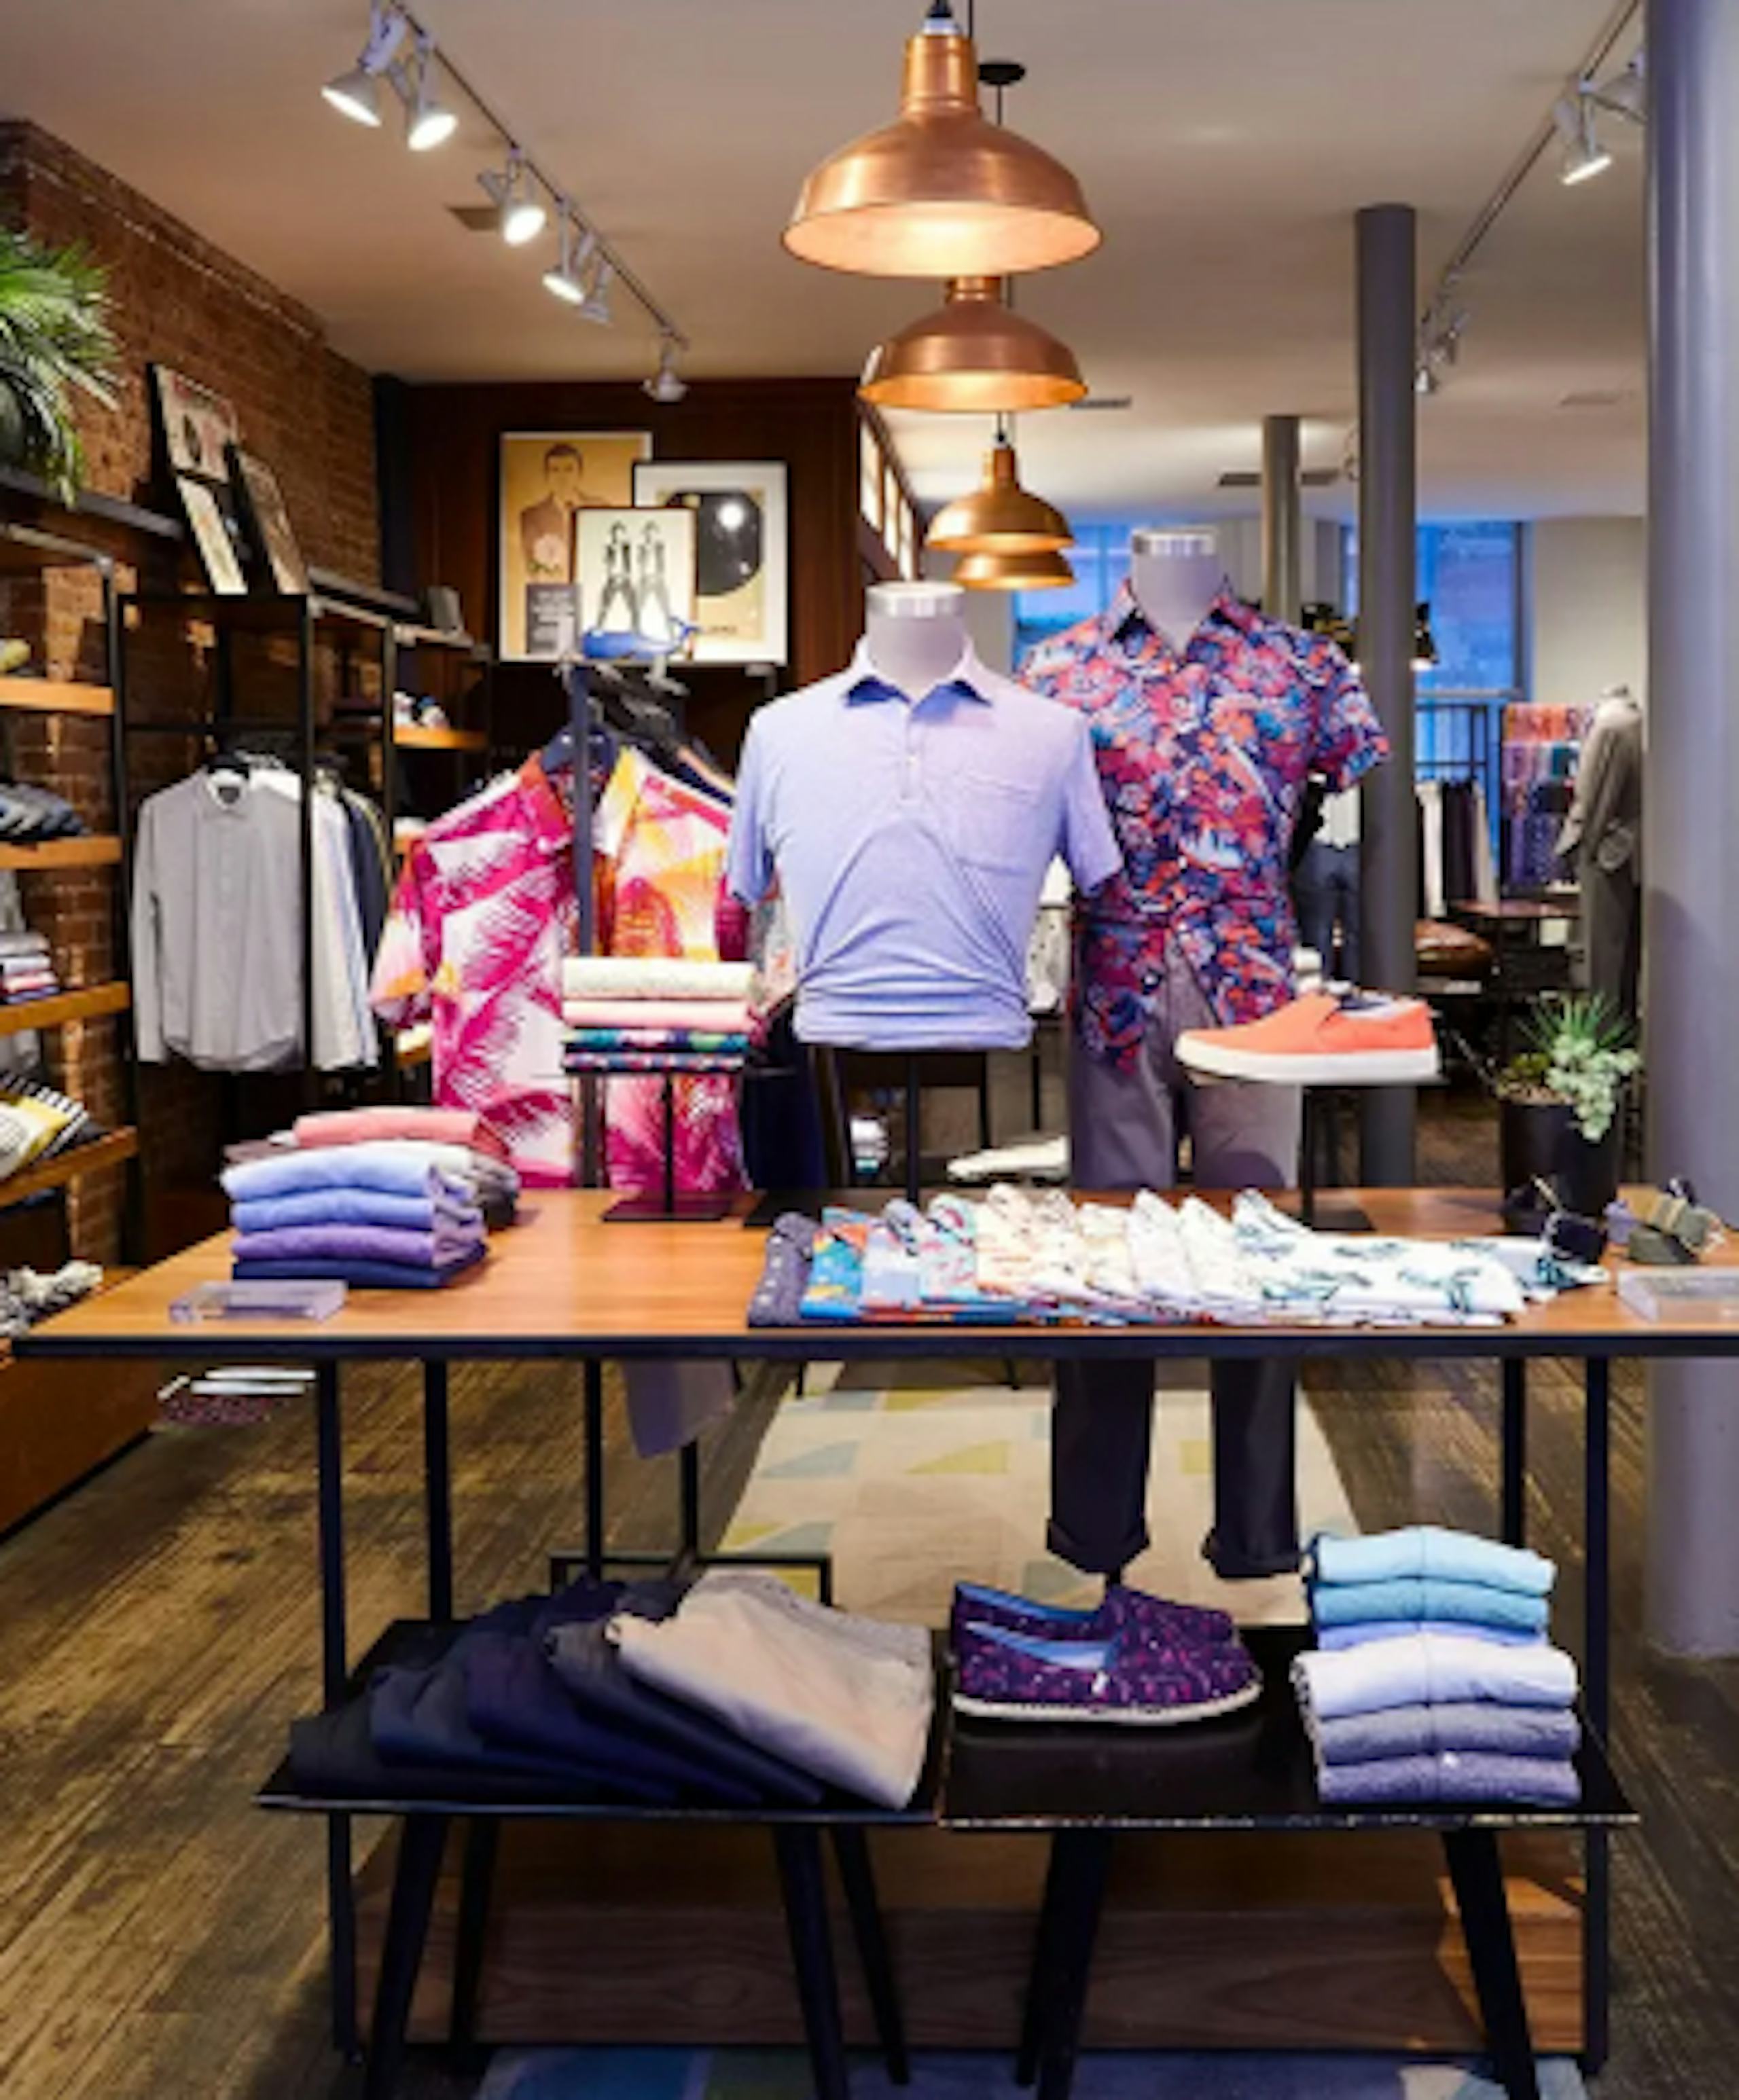 Bonobos clothes displayed in store